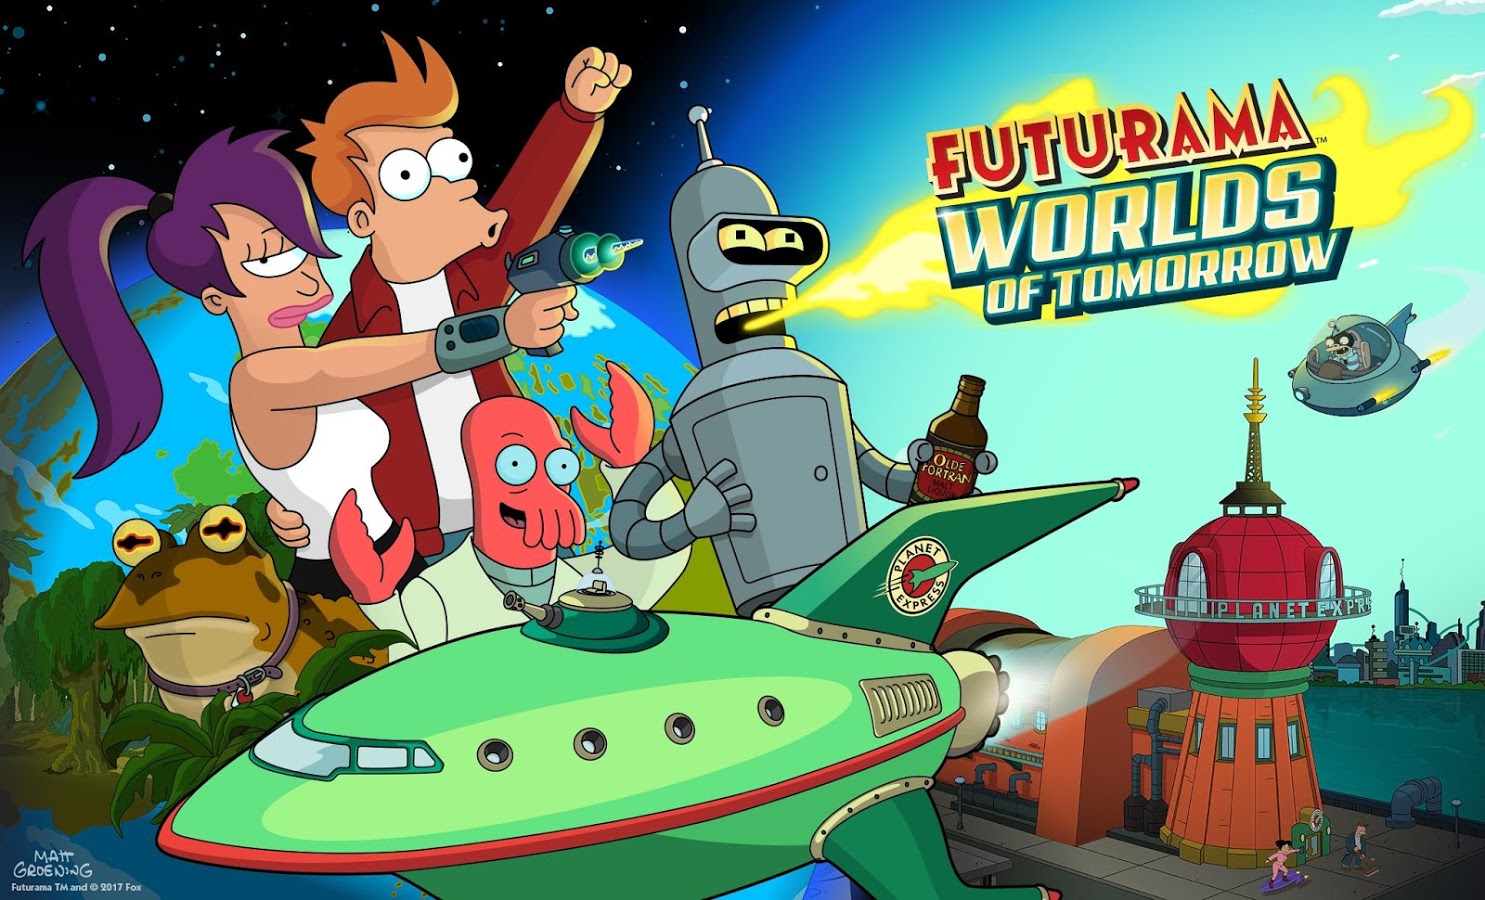 FUTURAMA - WORLDS of TOMORROW [Review]: Frying the Void.